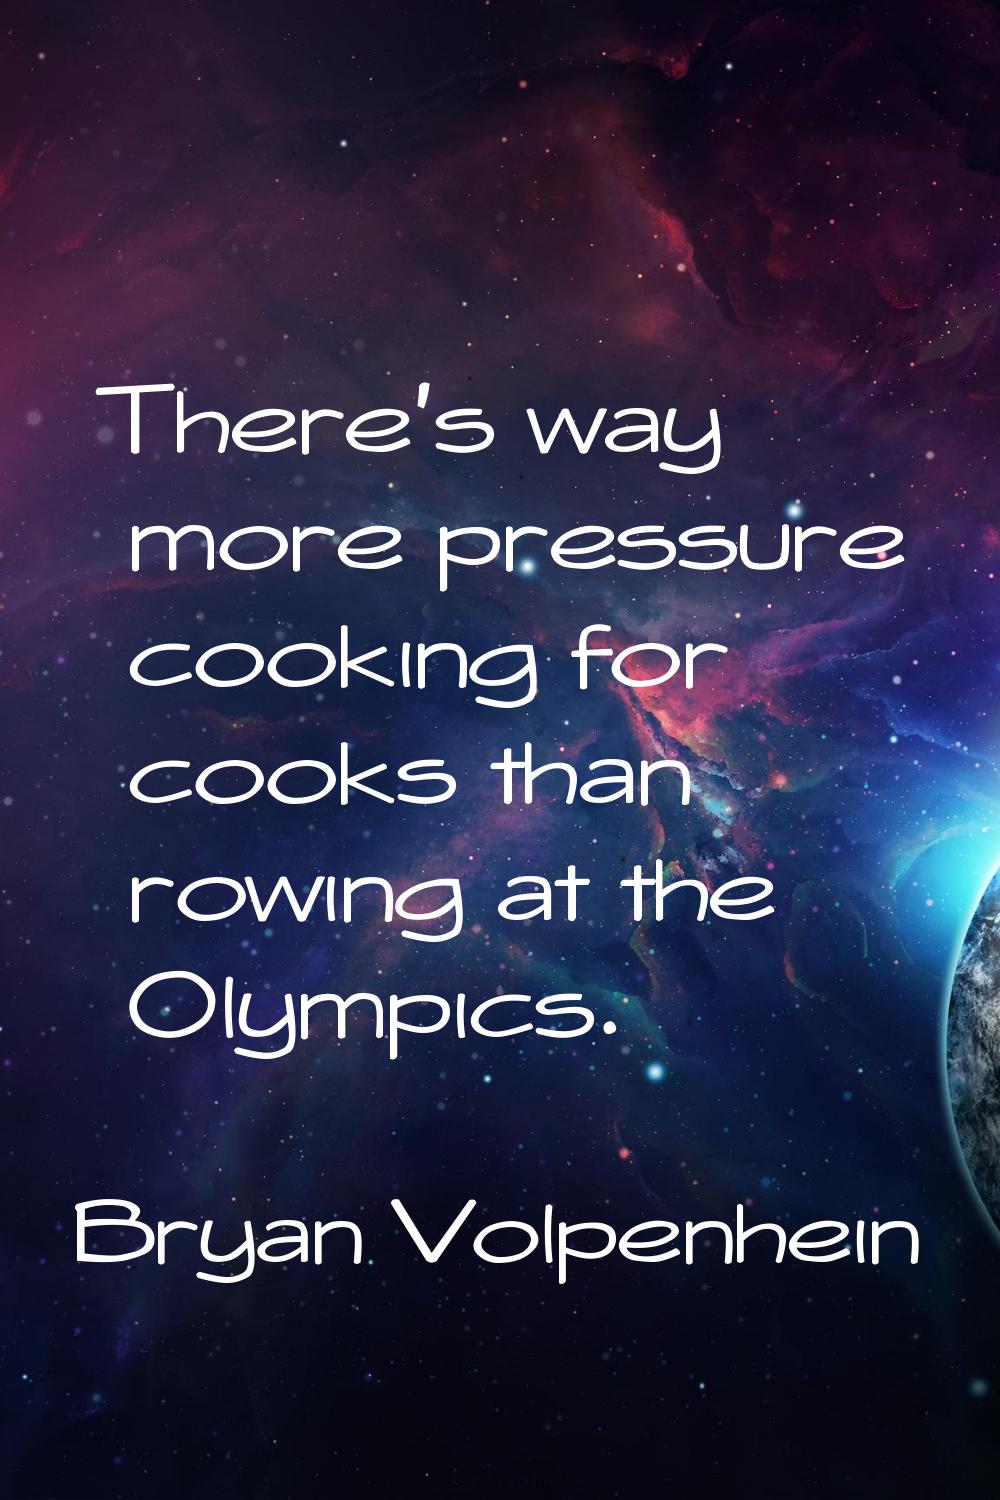 There's way more pressure cooking for cooks than rowing at the Olympics.